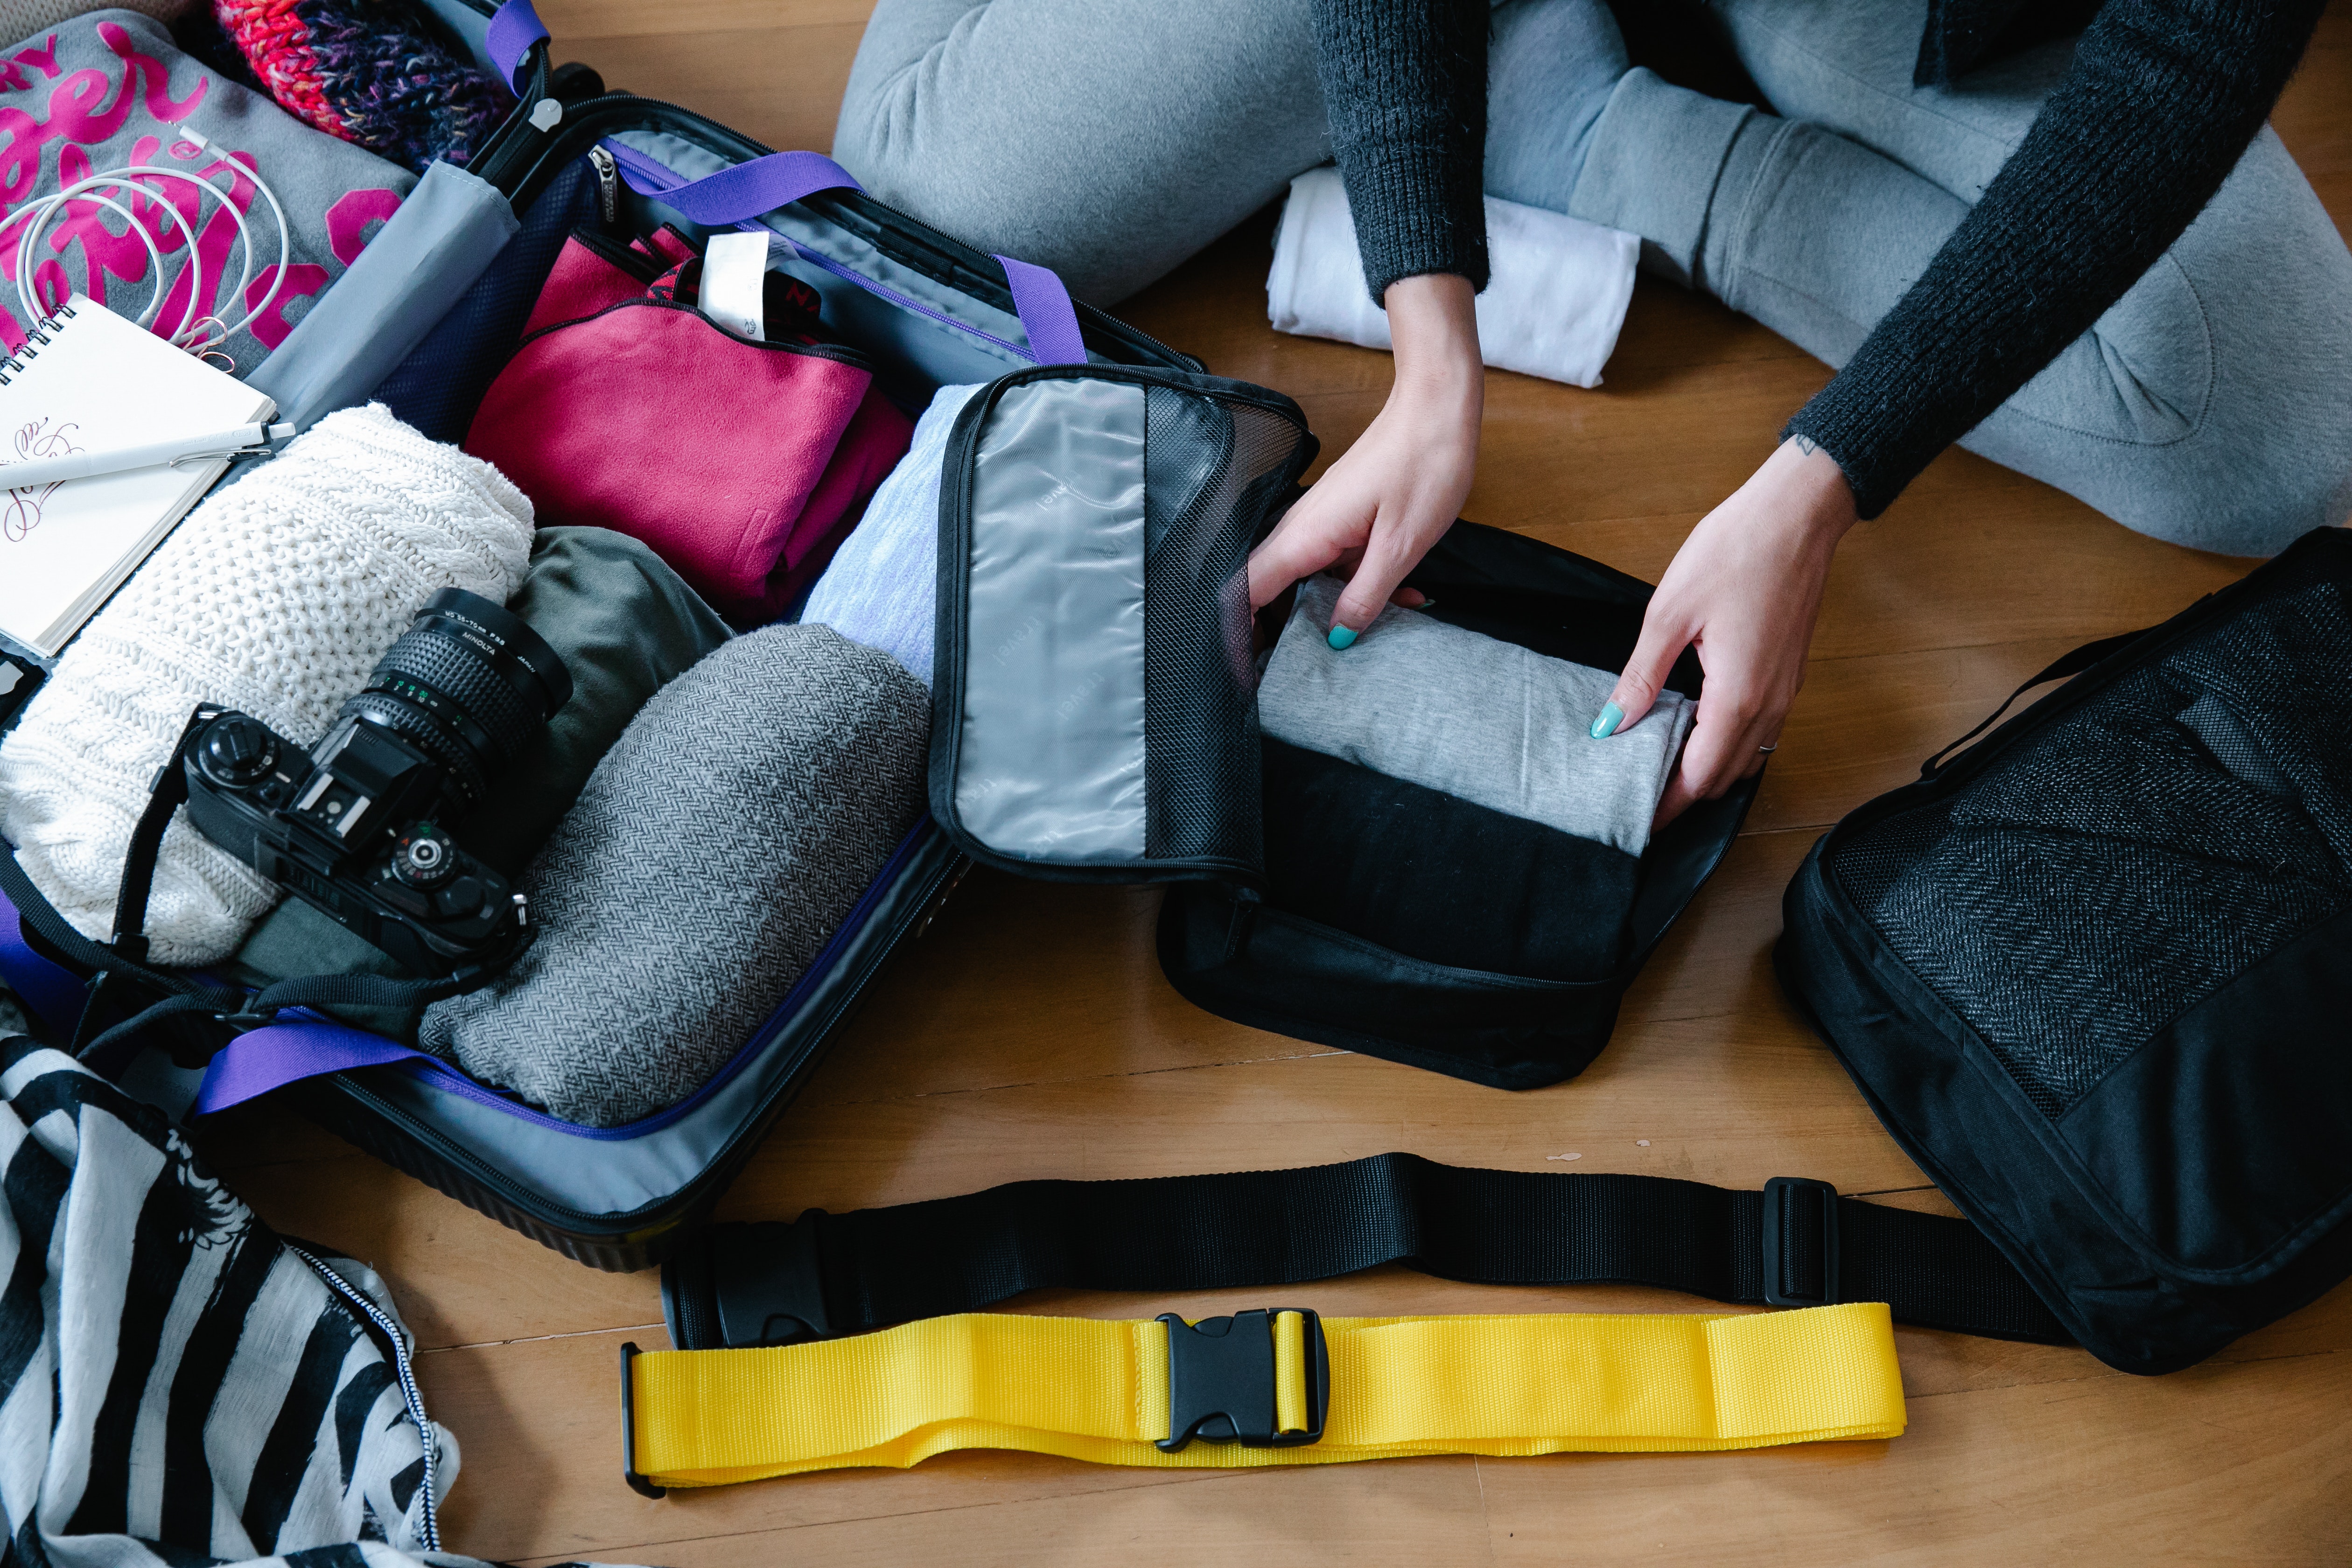 A woman packing | Source: Pexels